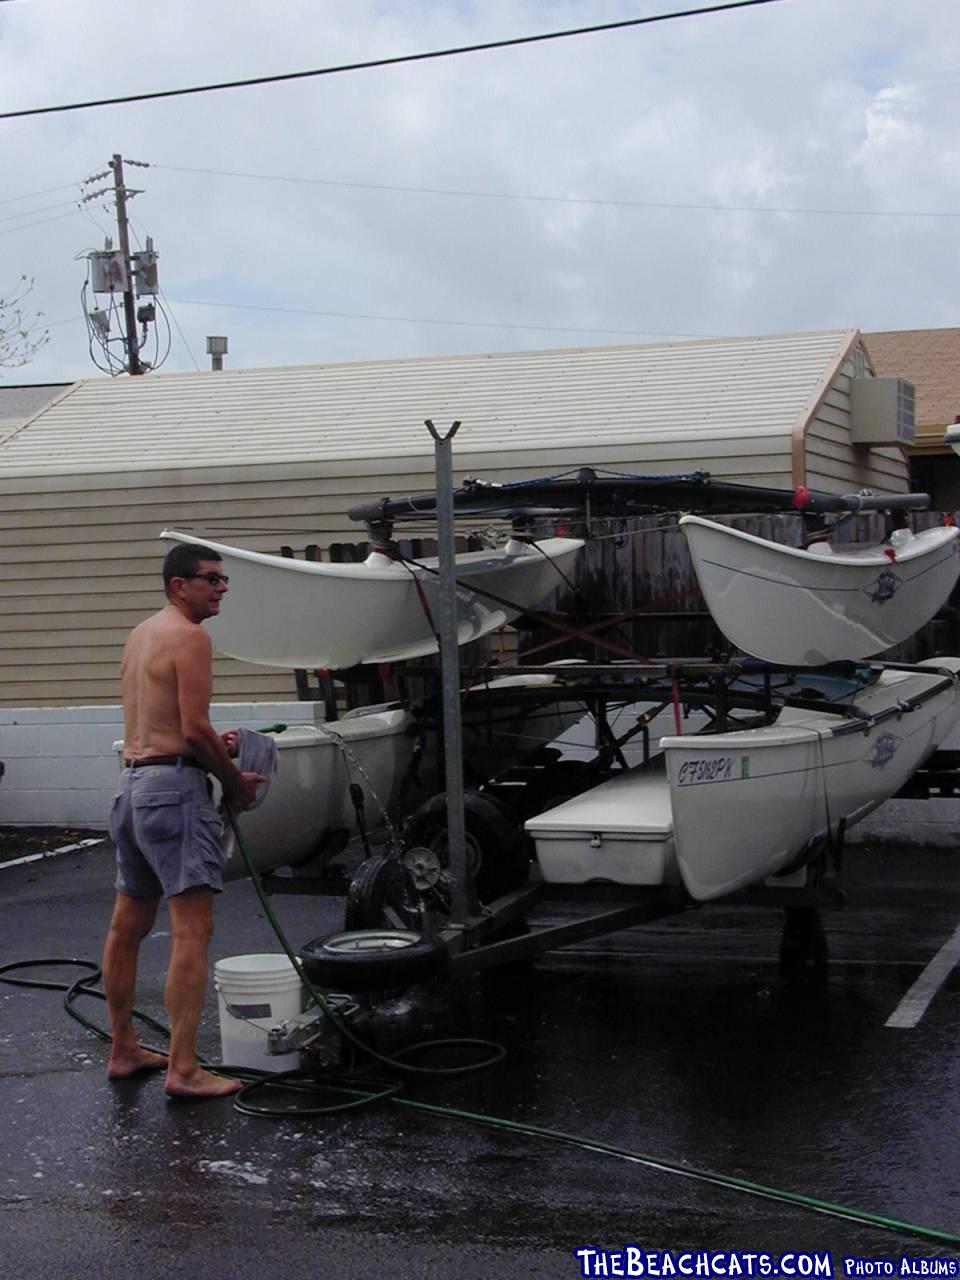 Bill washing boats after our arrival in Fort Walton Beach.